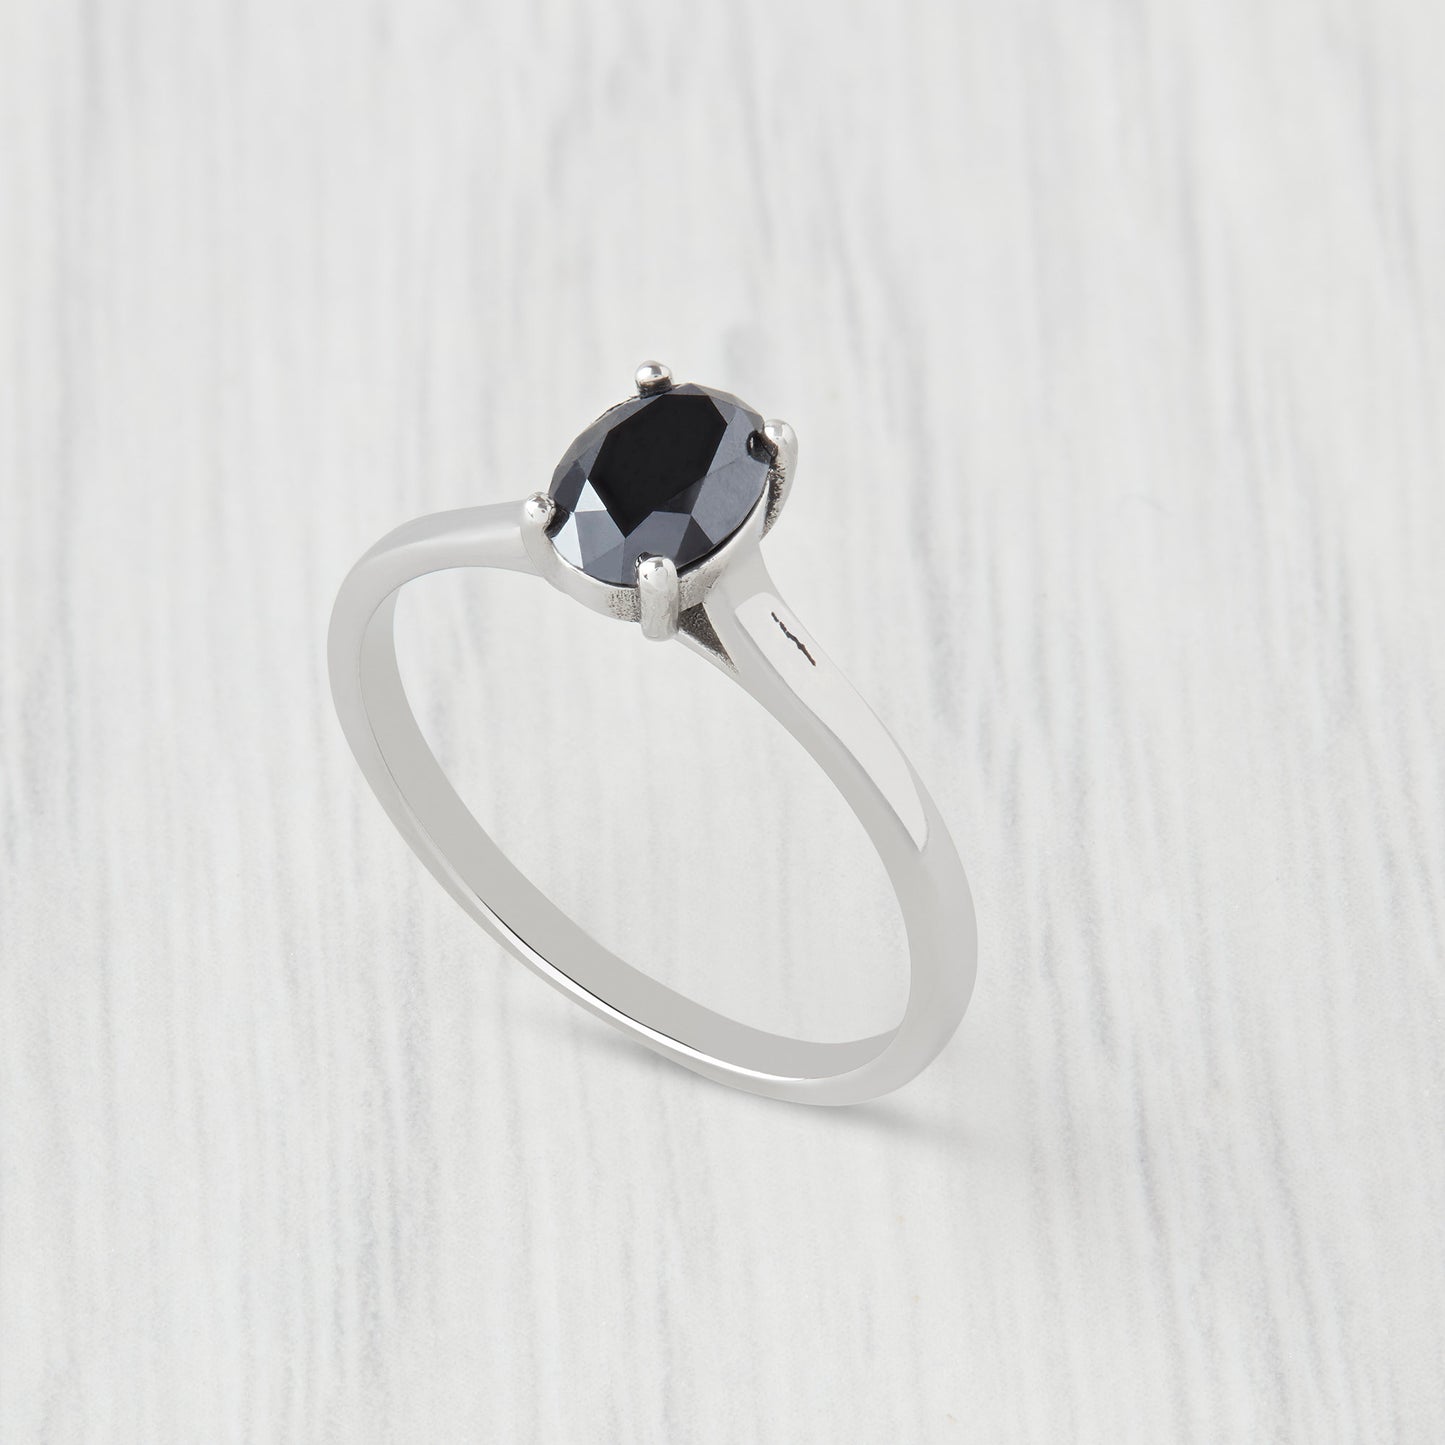 0.7ct Oval Cut Black Moissanite Solitaire cathedral in Titanium or White Gold